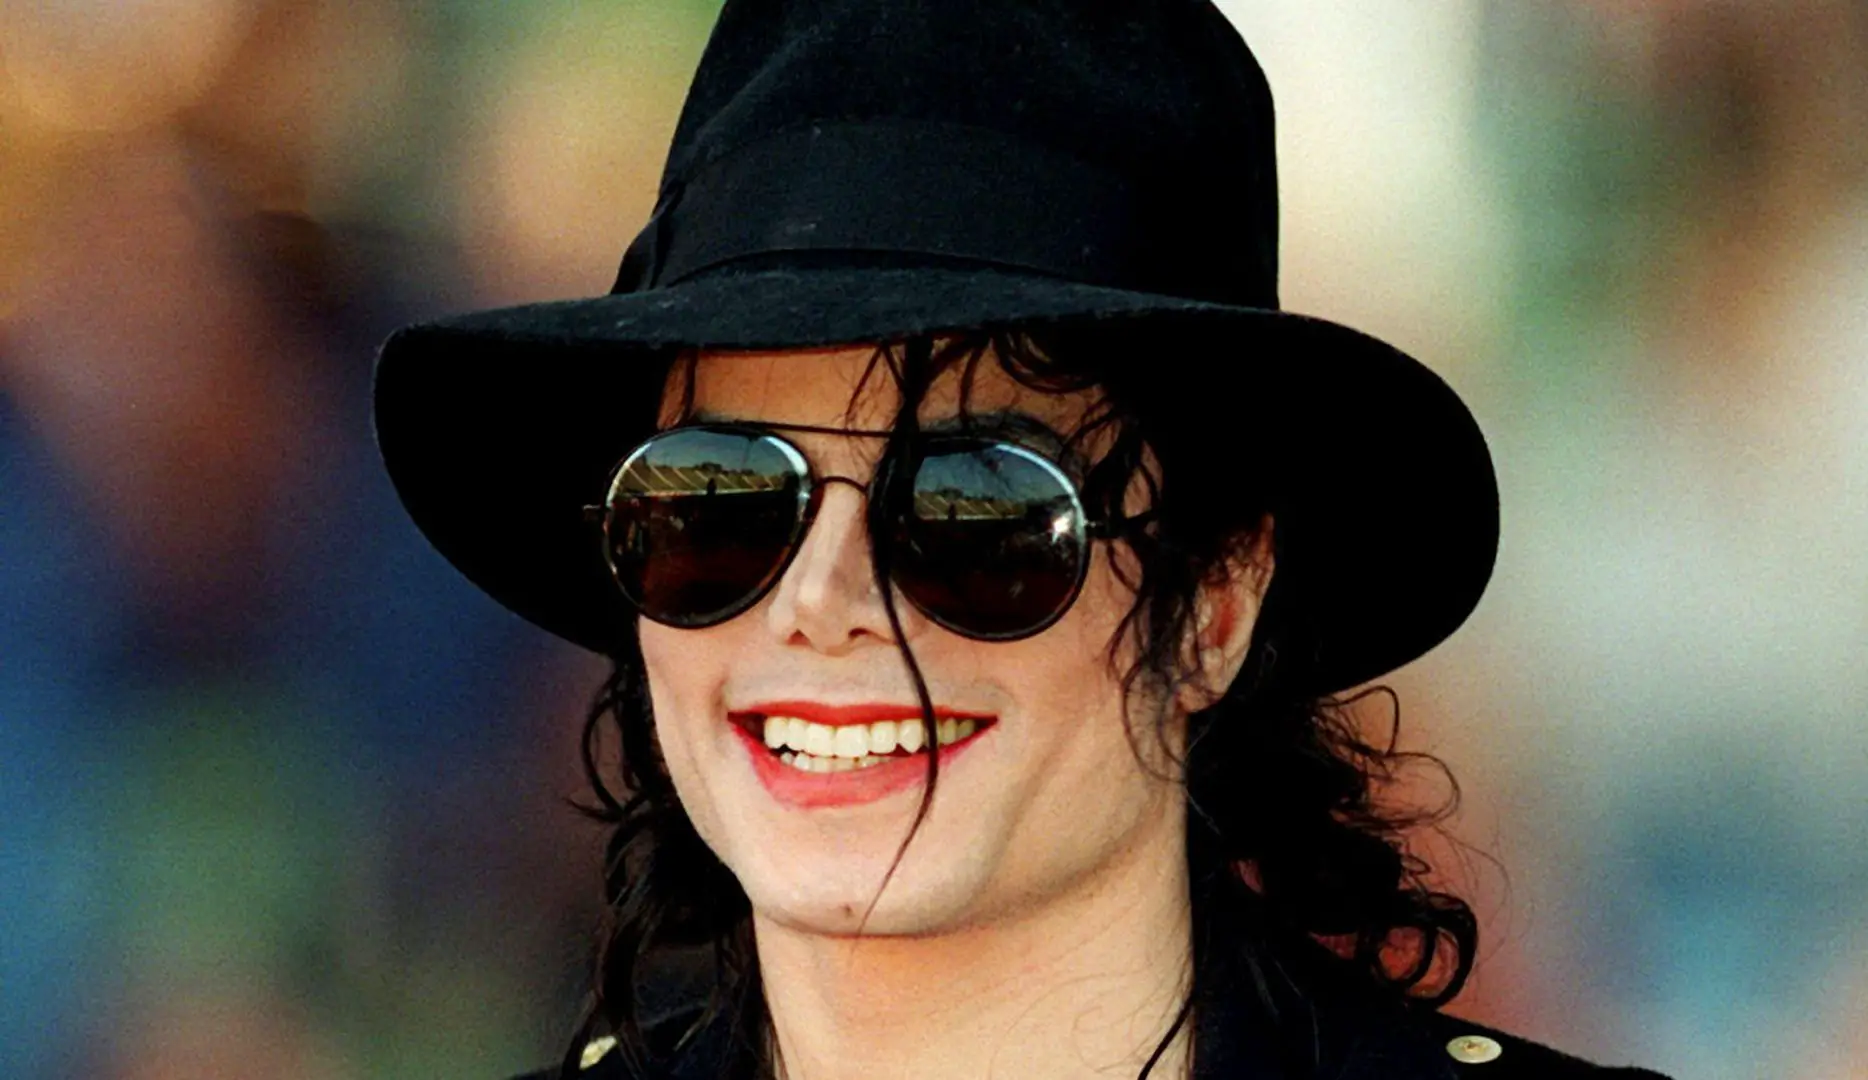 Michael Jackson Net Worth is $236 Million or More Than This?